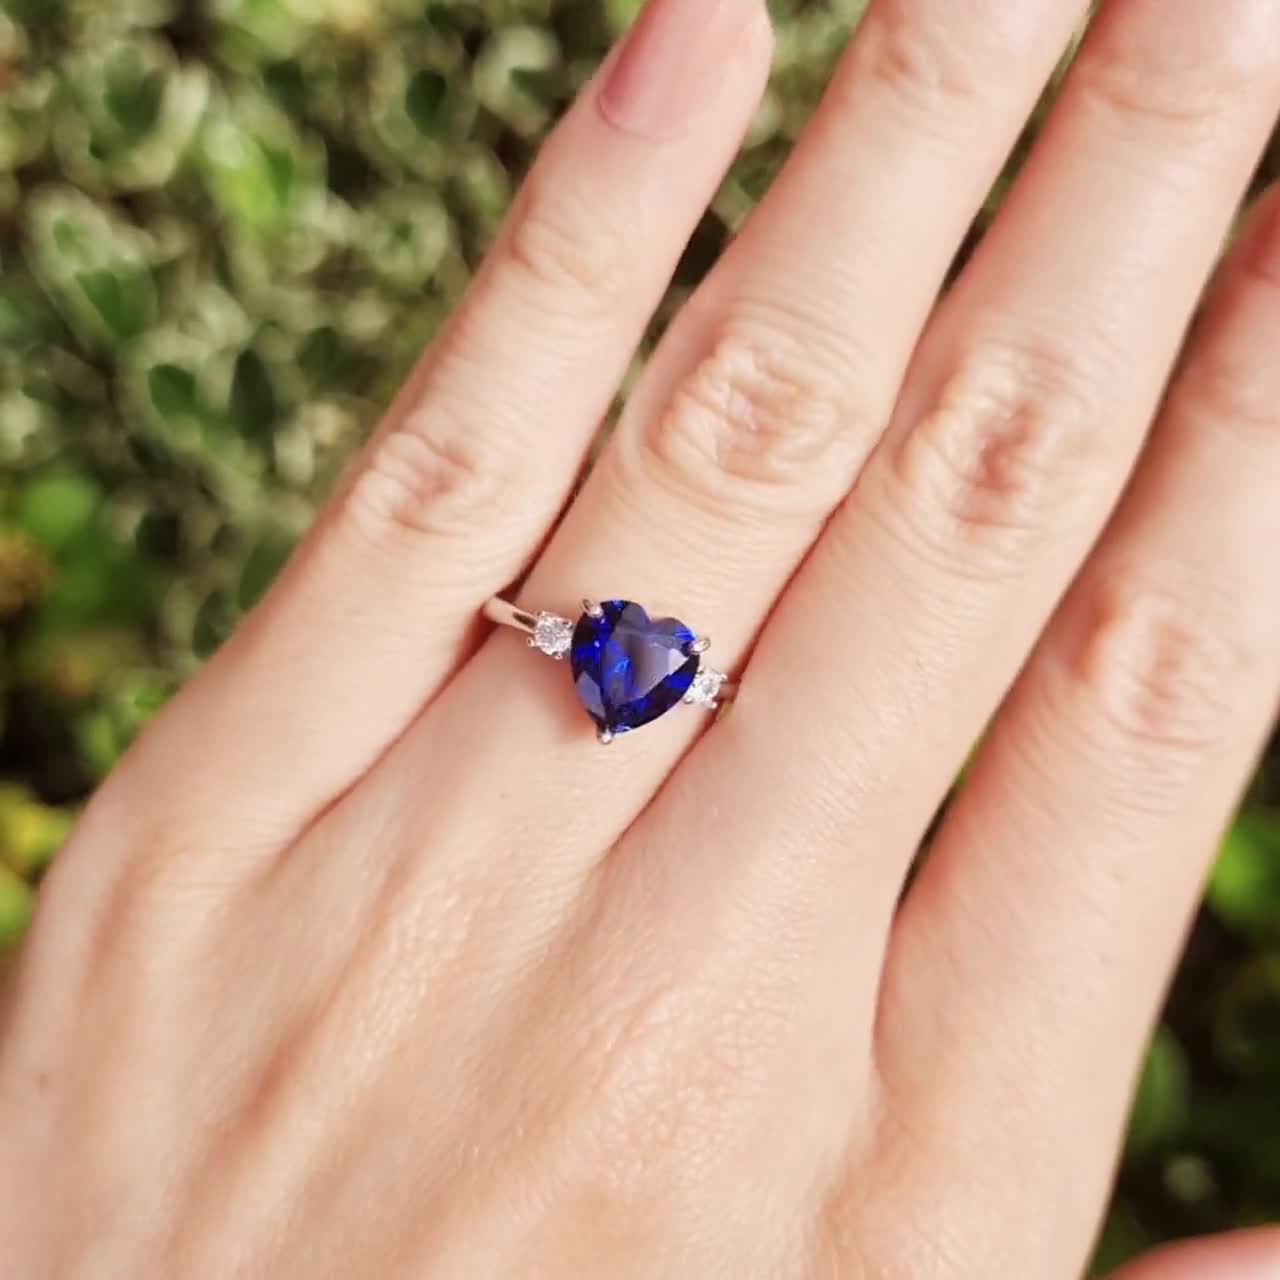 2 Ct Heart Cut Simulated Blue Sapphire Engagement Band Ring 925 Sterling  Silver | eBay